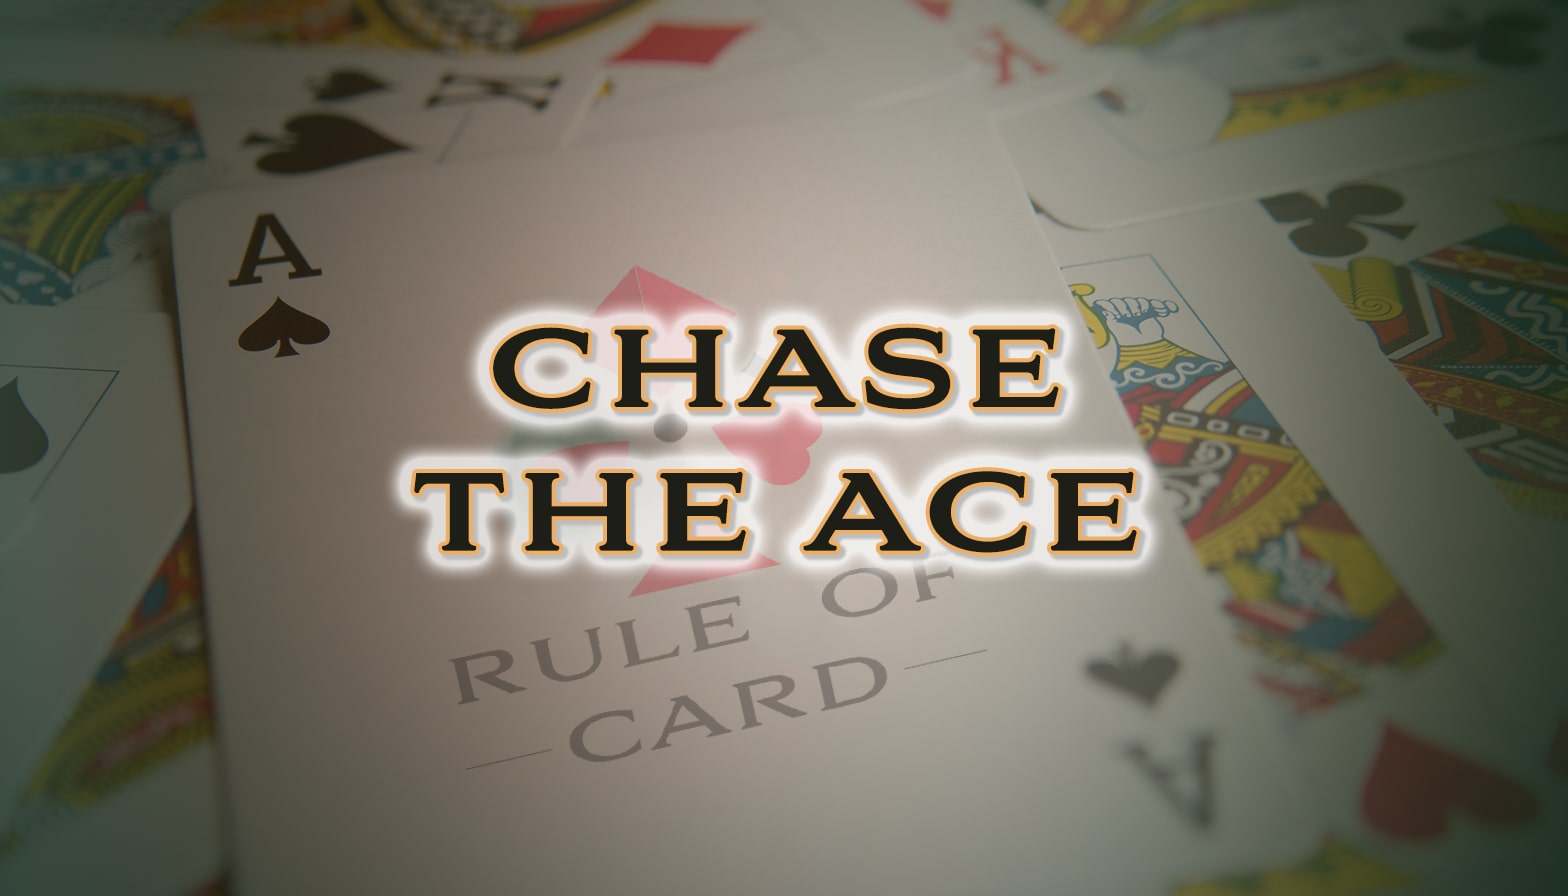 Playing the card game Chase the Ace